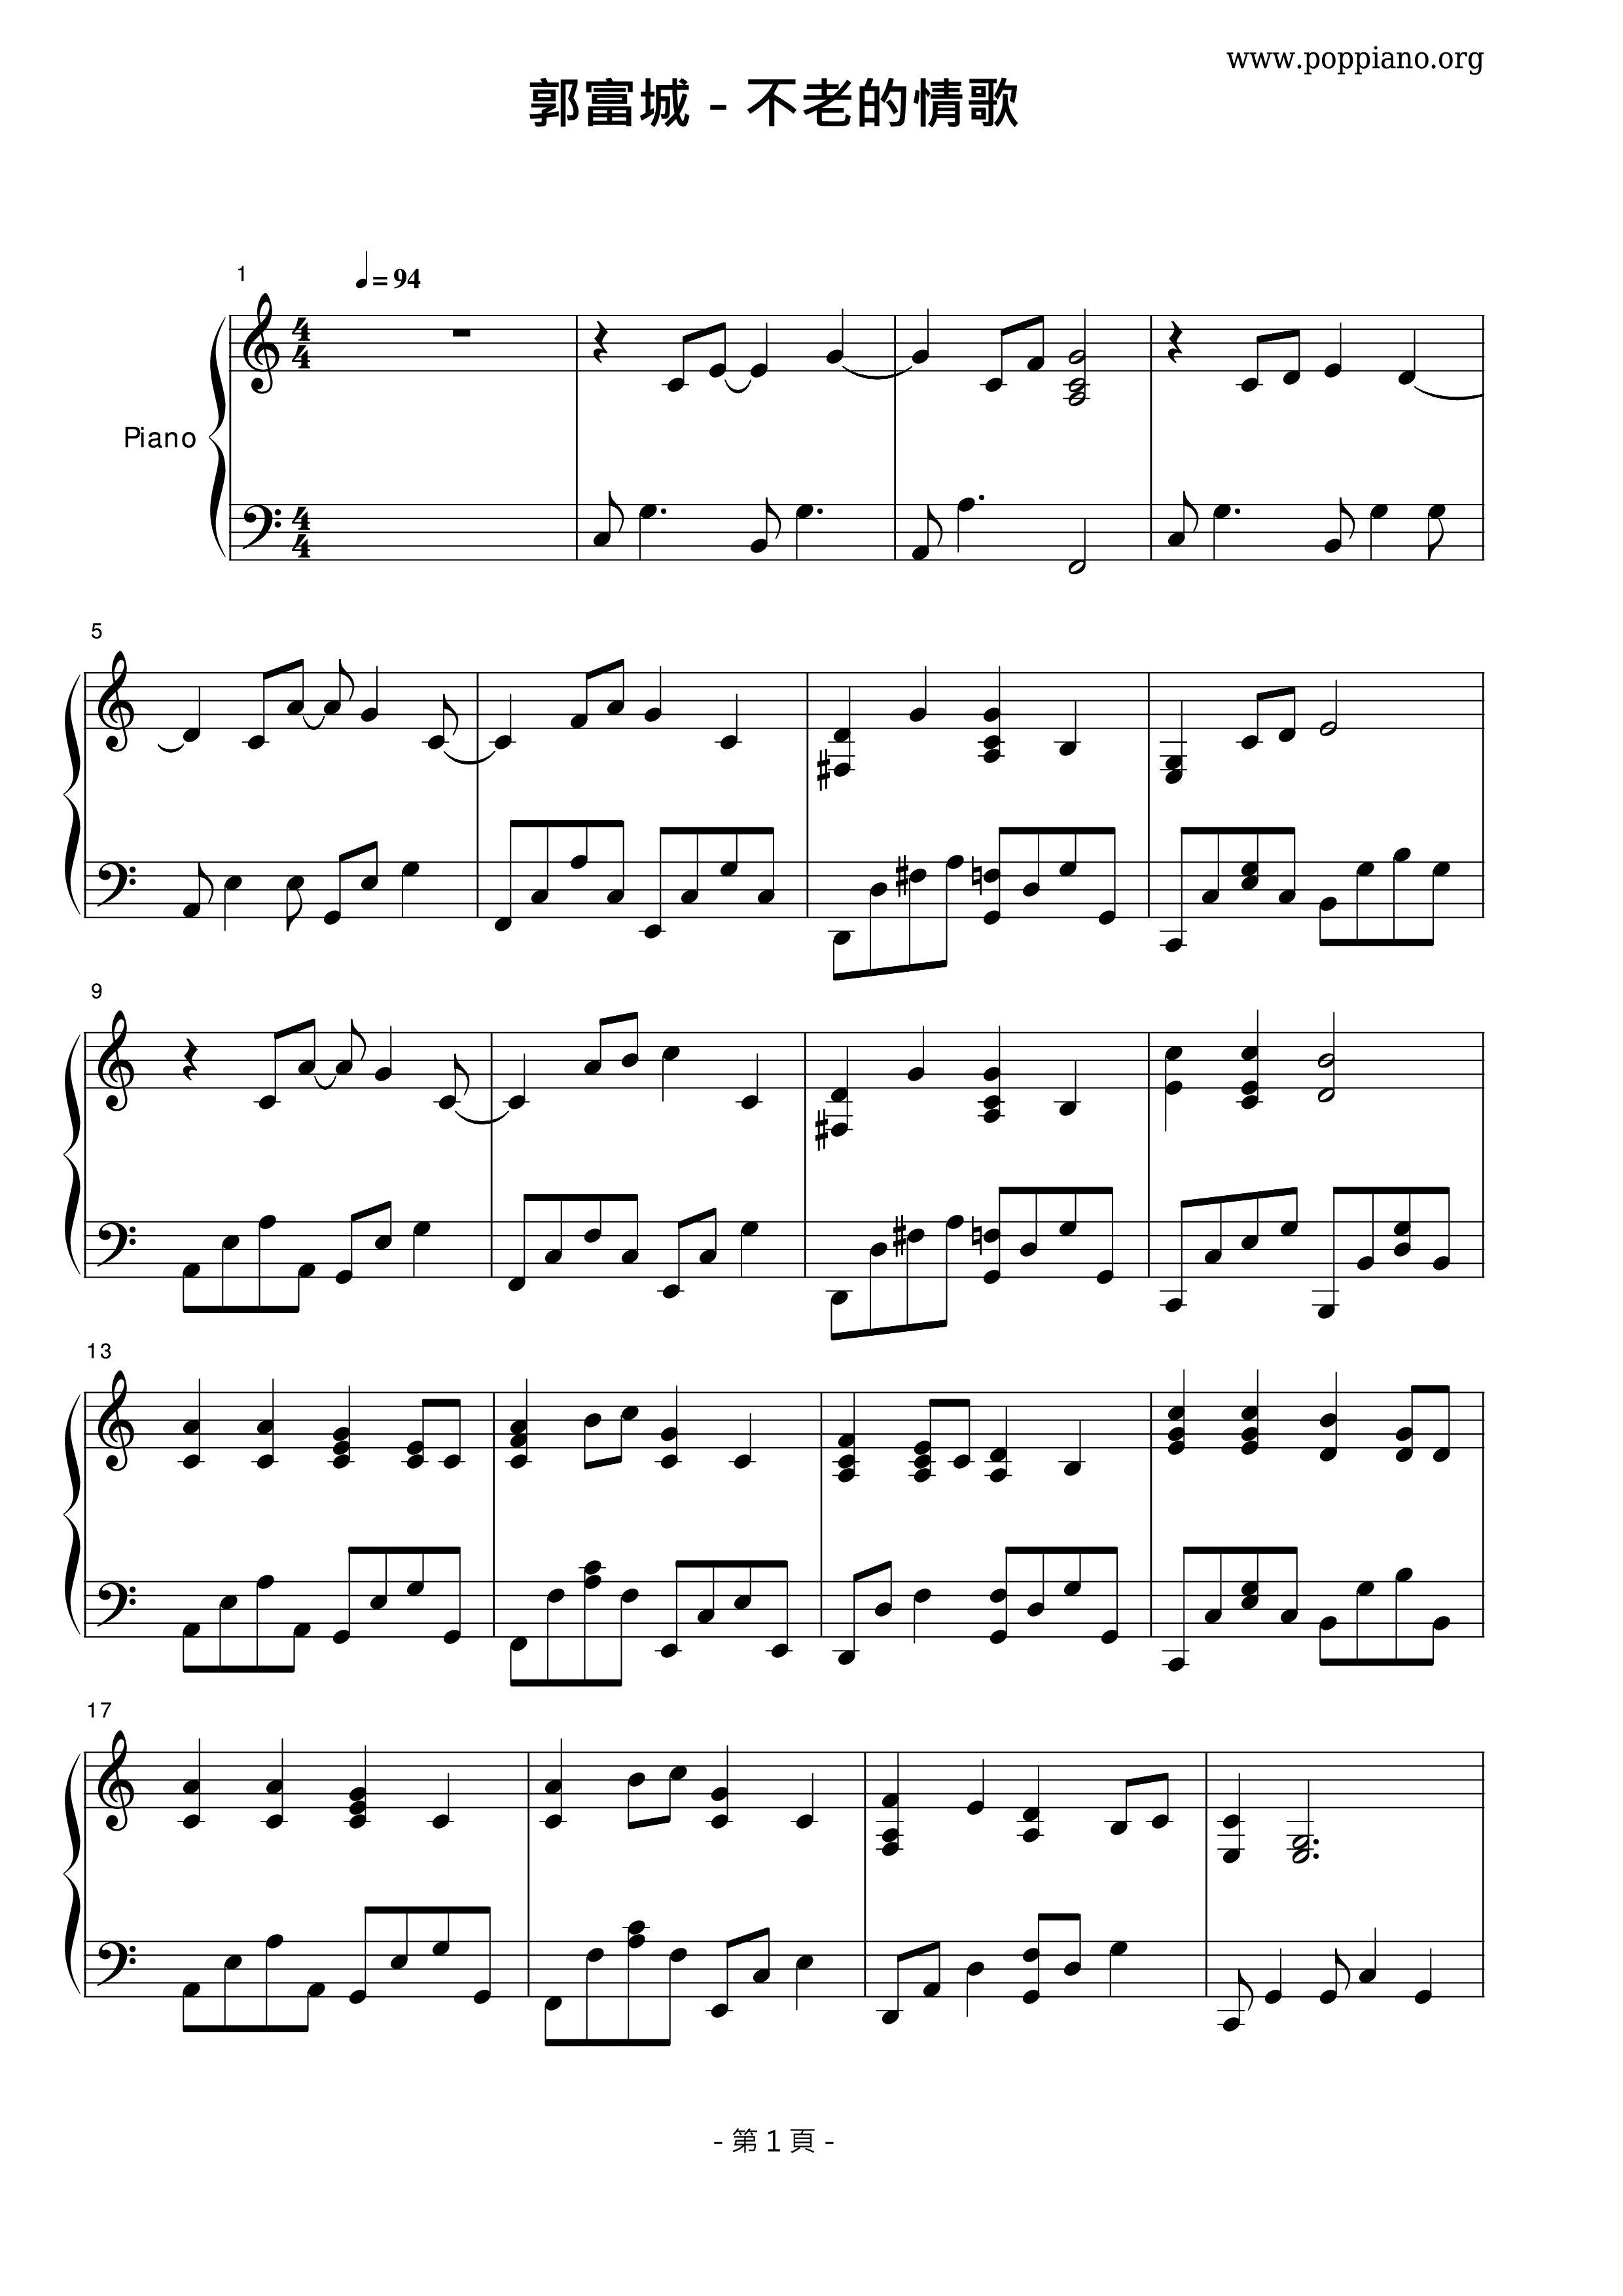 Not Old Love Song Score